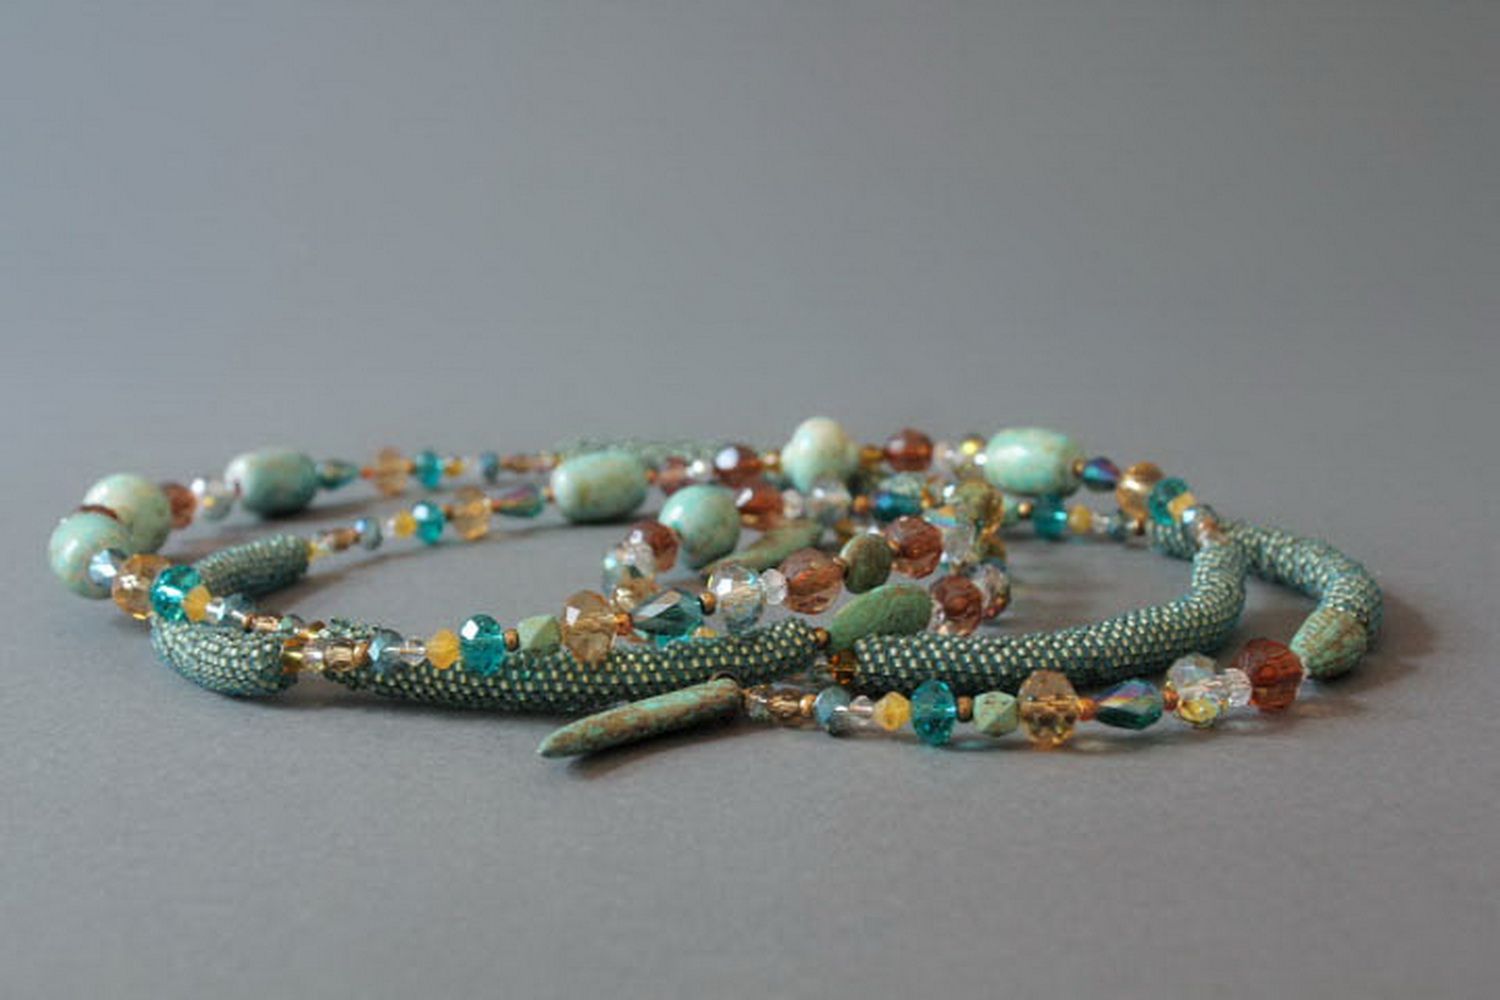 Plaited necklace made from beads with decorative stones photo 8